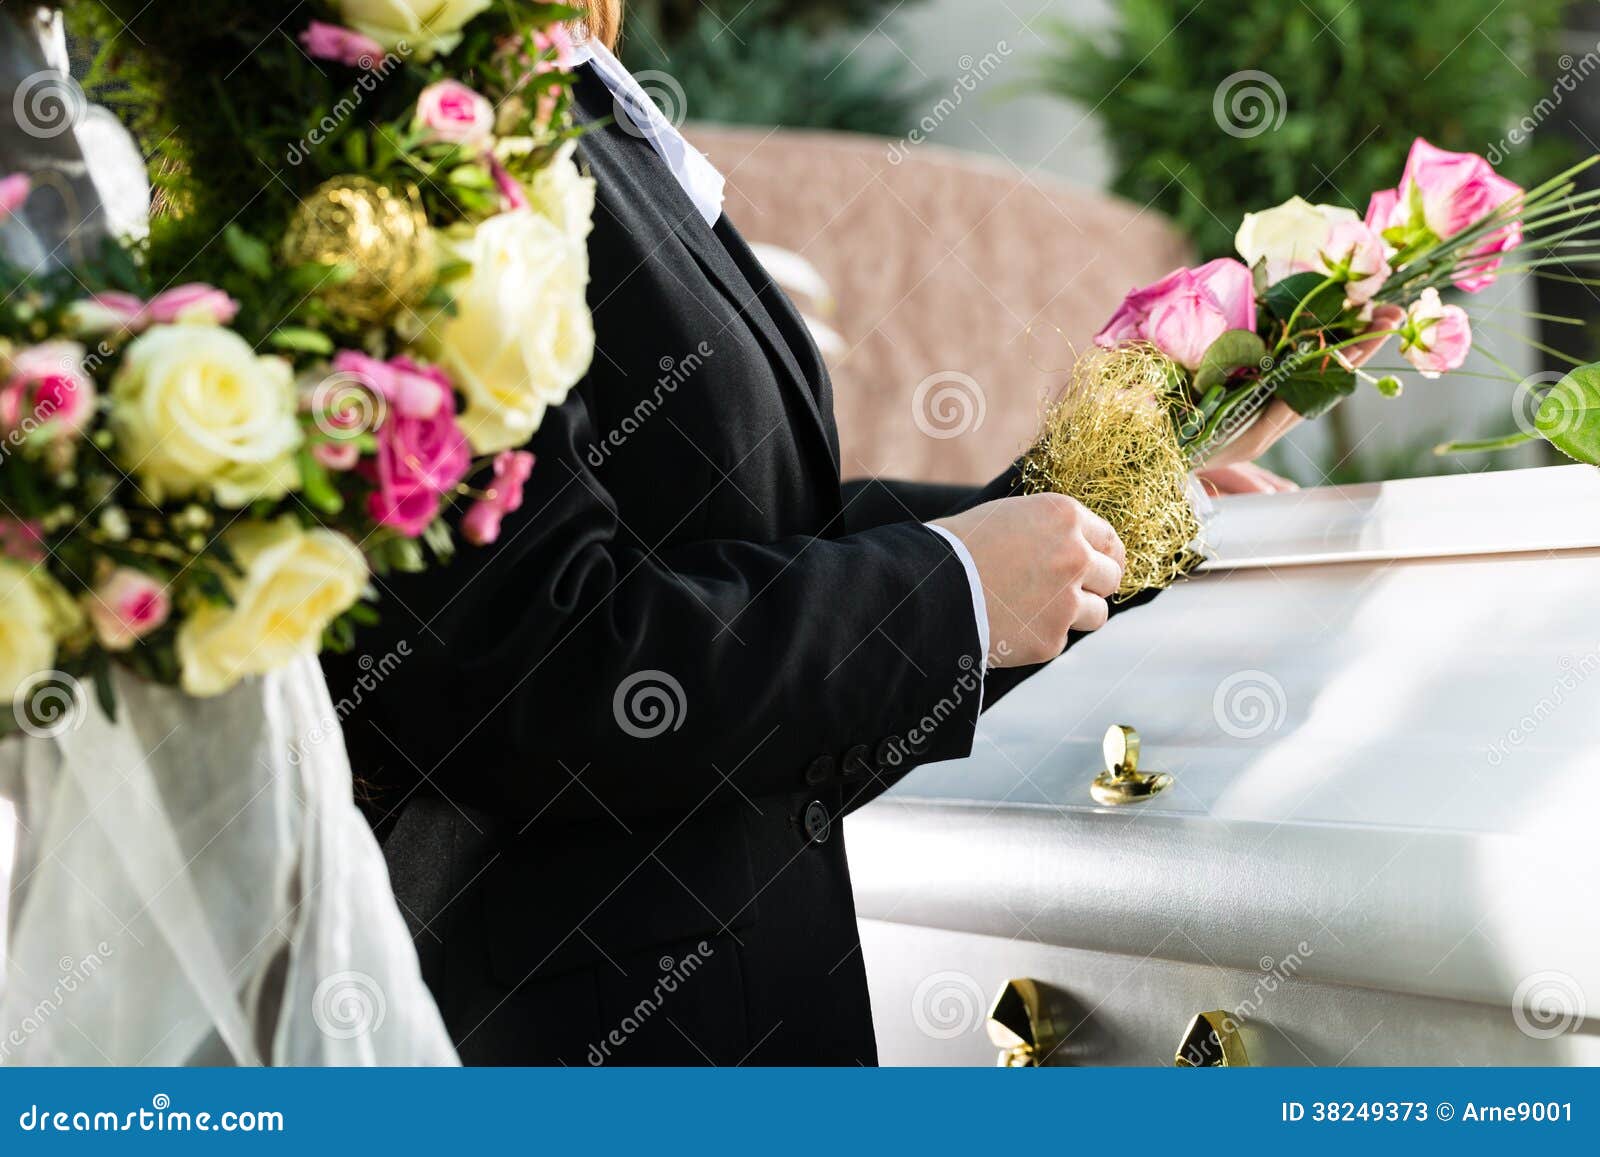 mourning people at funeral with coffin